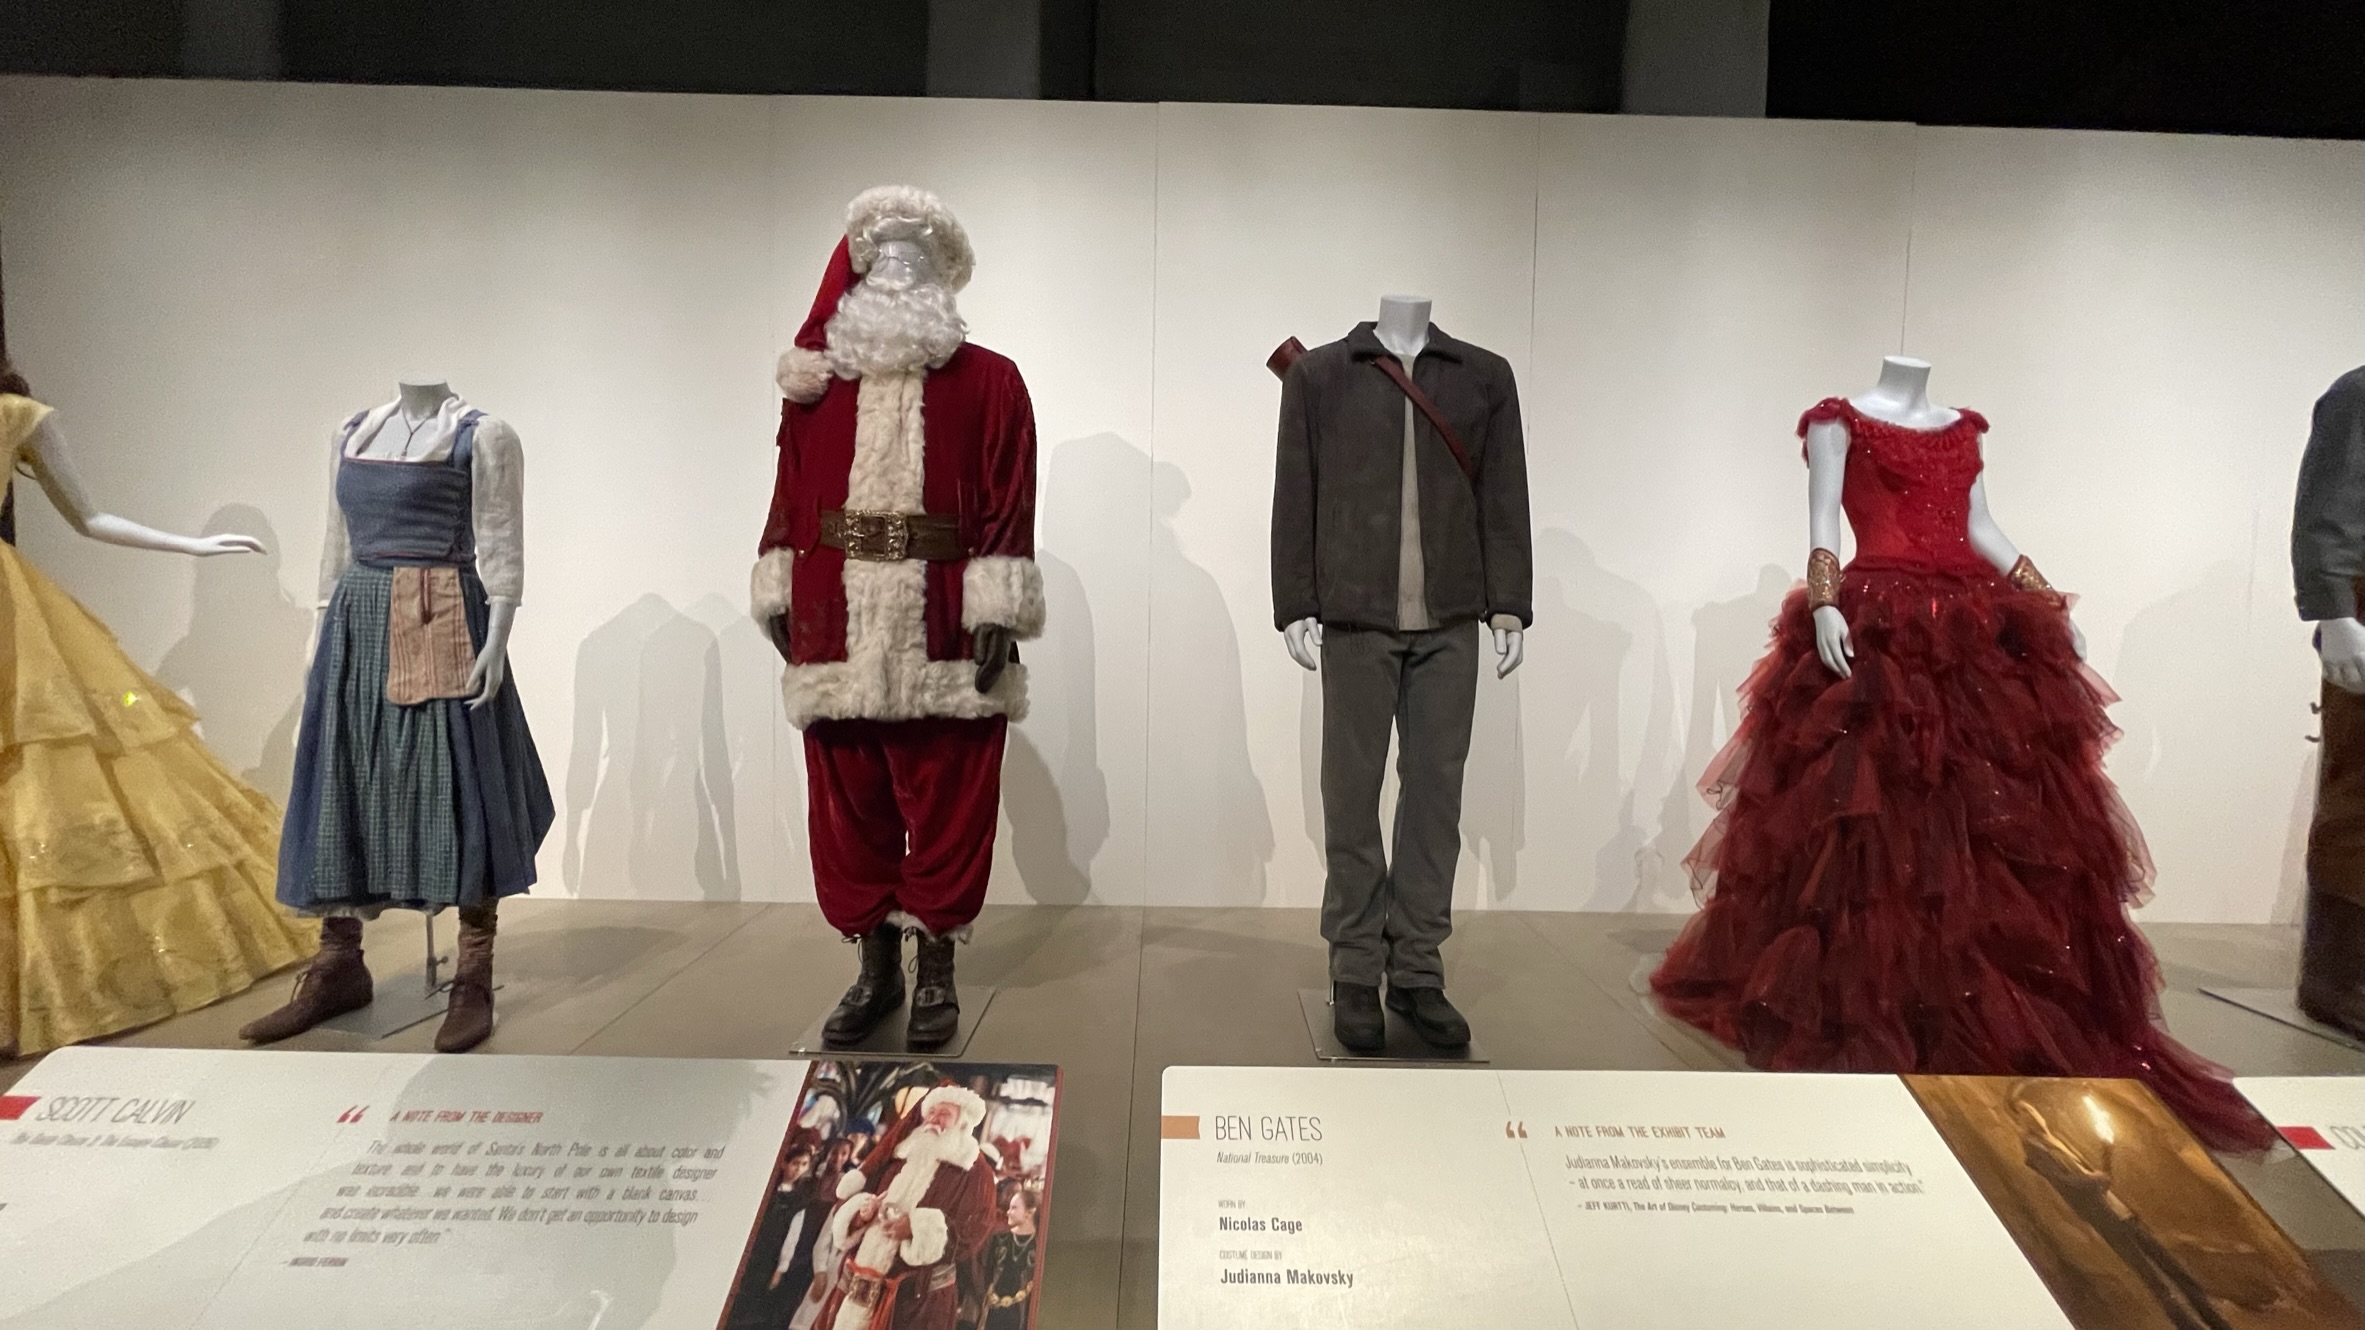 Disney Archives Disney Heroes & Villains: The Art of the Disney Costume 'Cinderella's Workshop Disney Costumes include Ben Gates played by Nicholas Cage and Scott Clavin Santa Clause